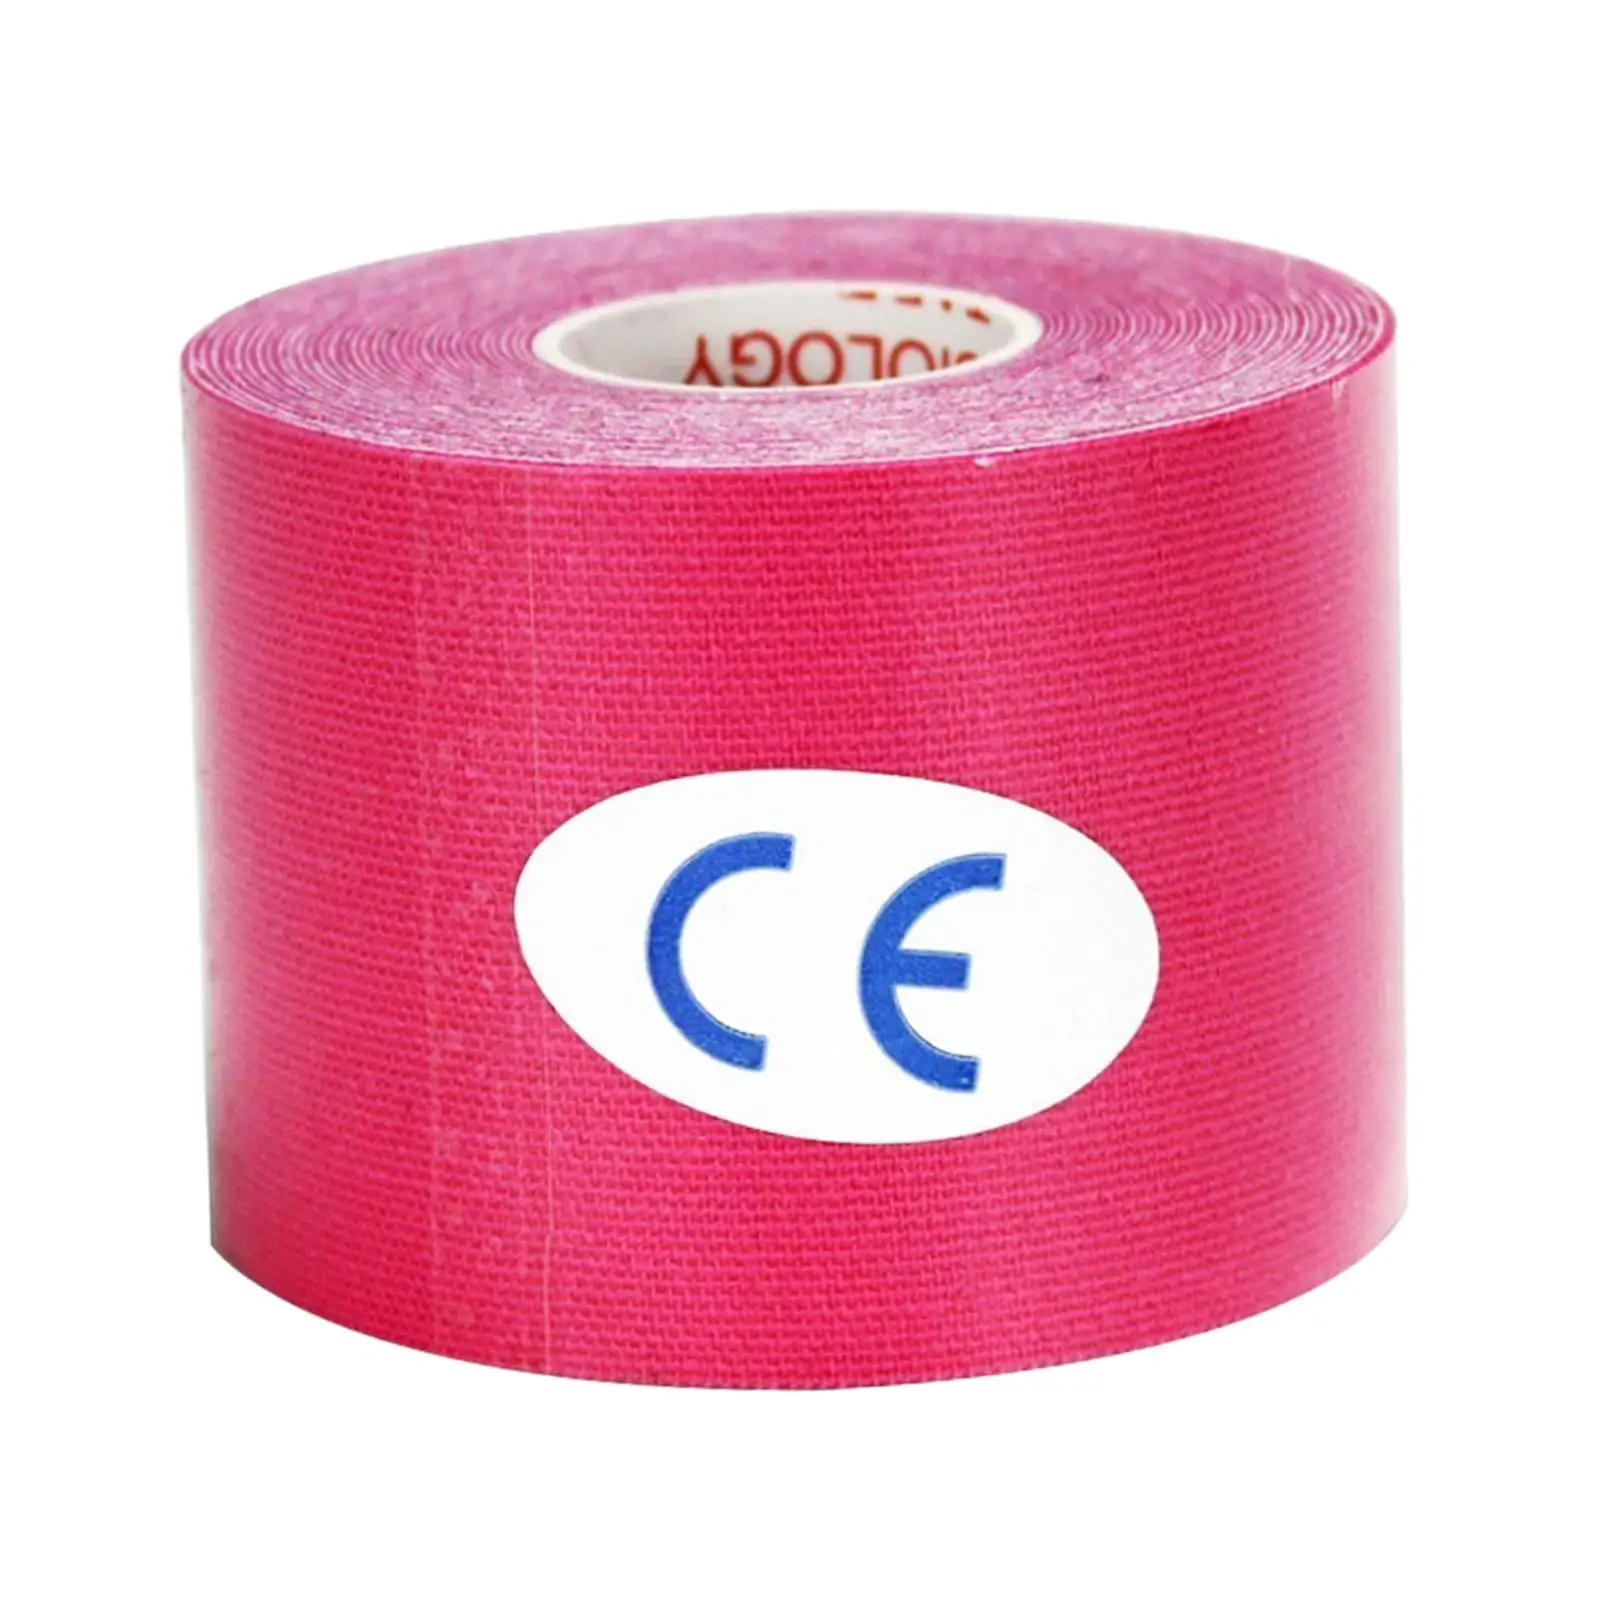 Athletic Tape Elastic Waterproof Pre Wrap Fitness Patch Breathable 5M Roll Sports Wrap Tape for Chest Ankles Knee Joint Fitness